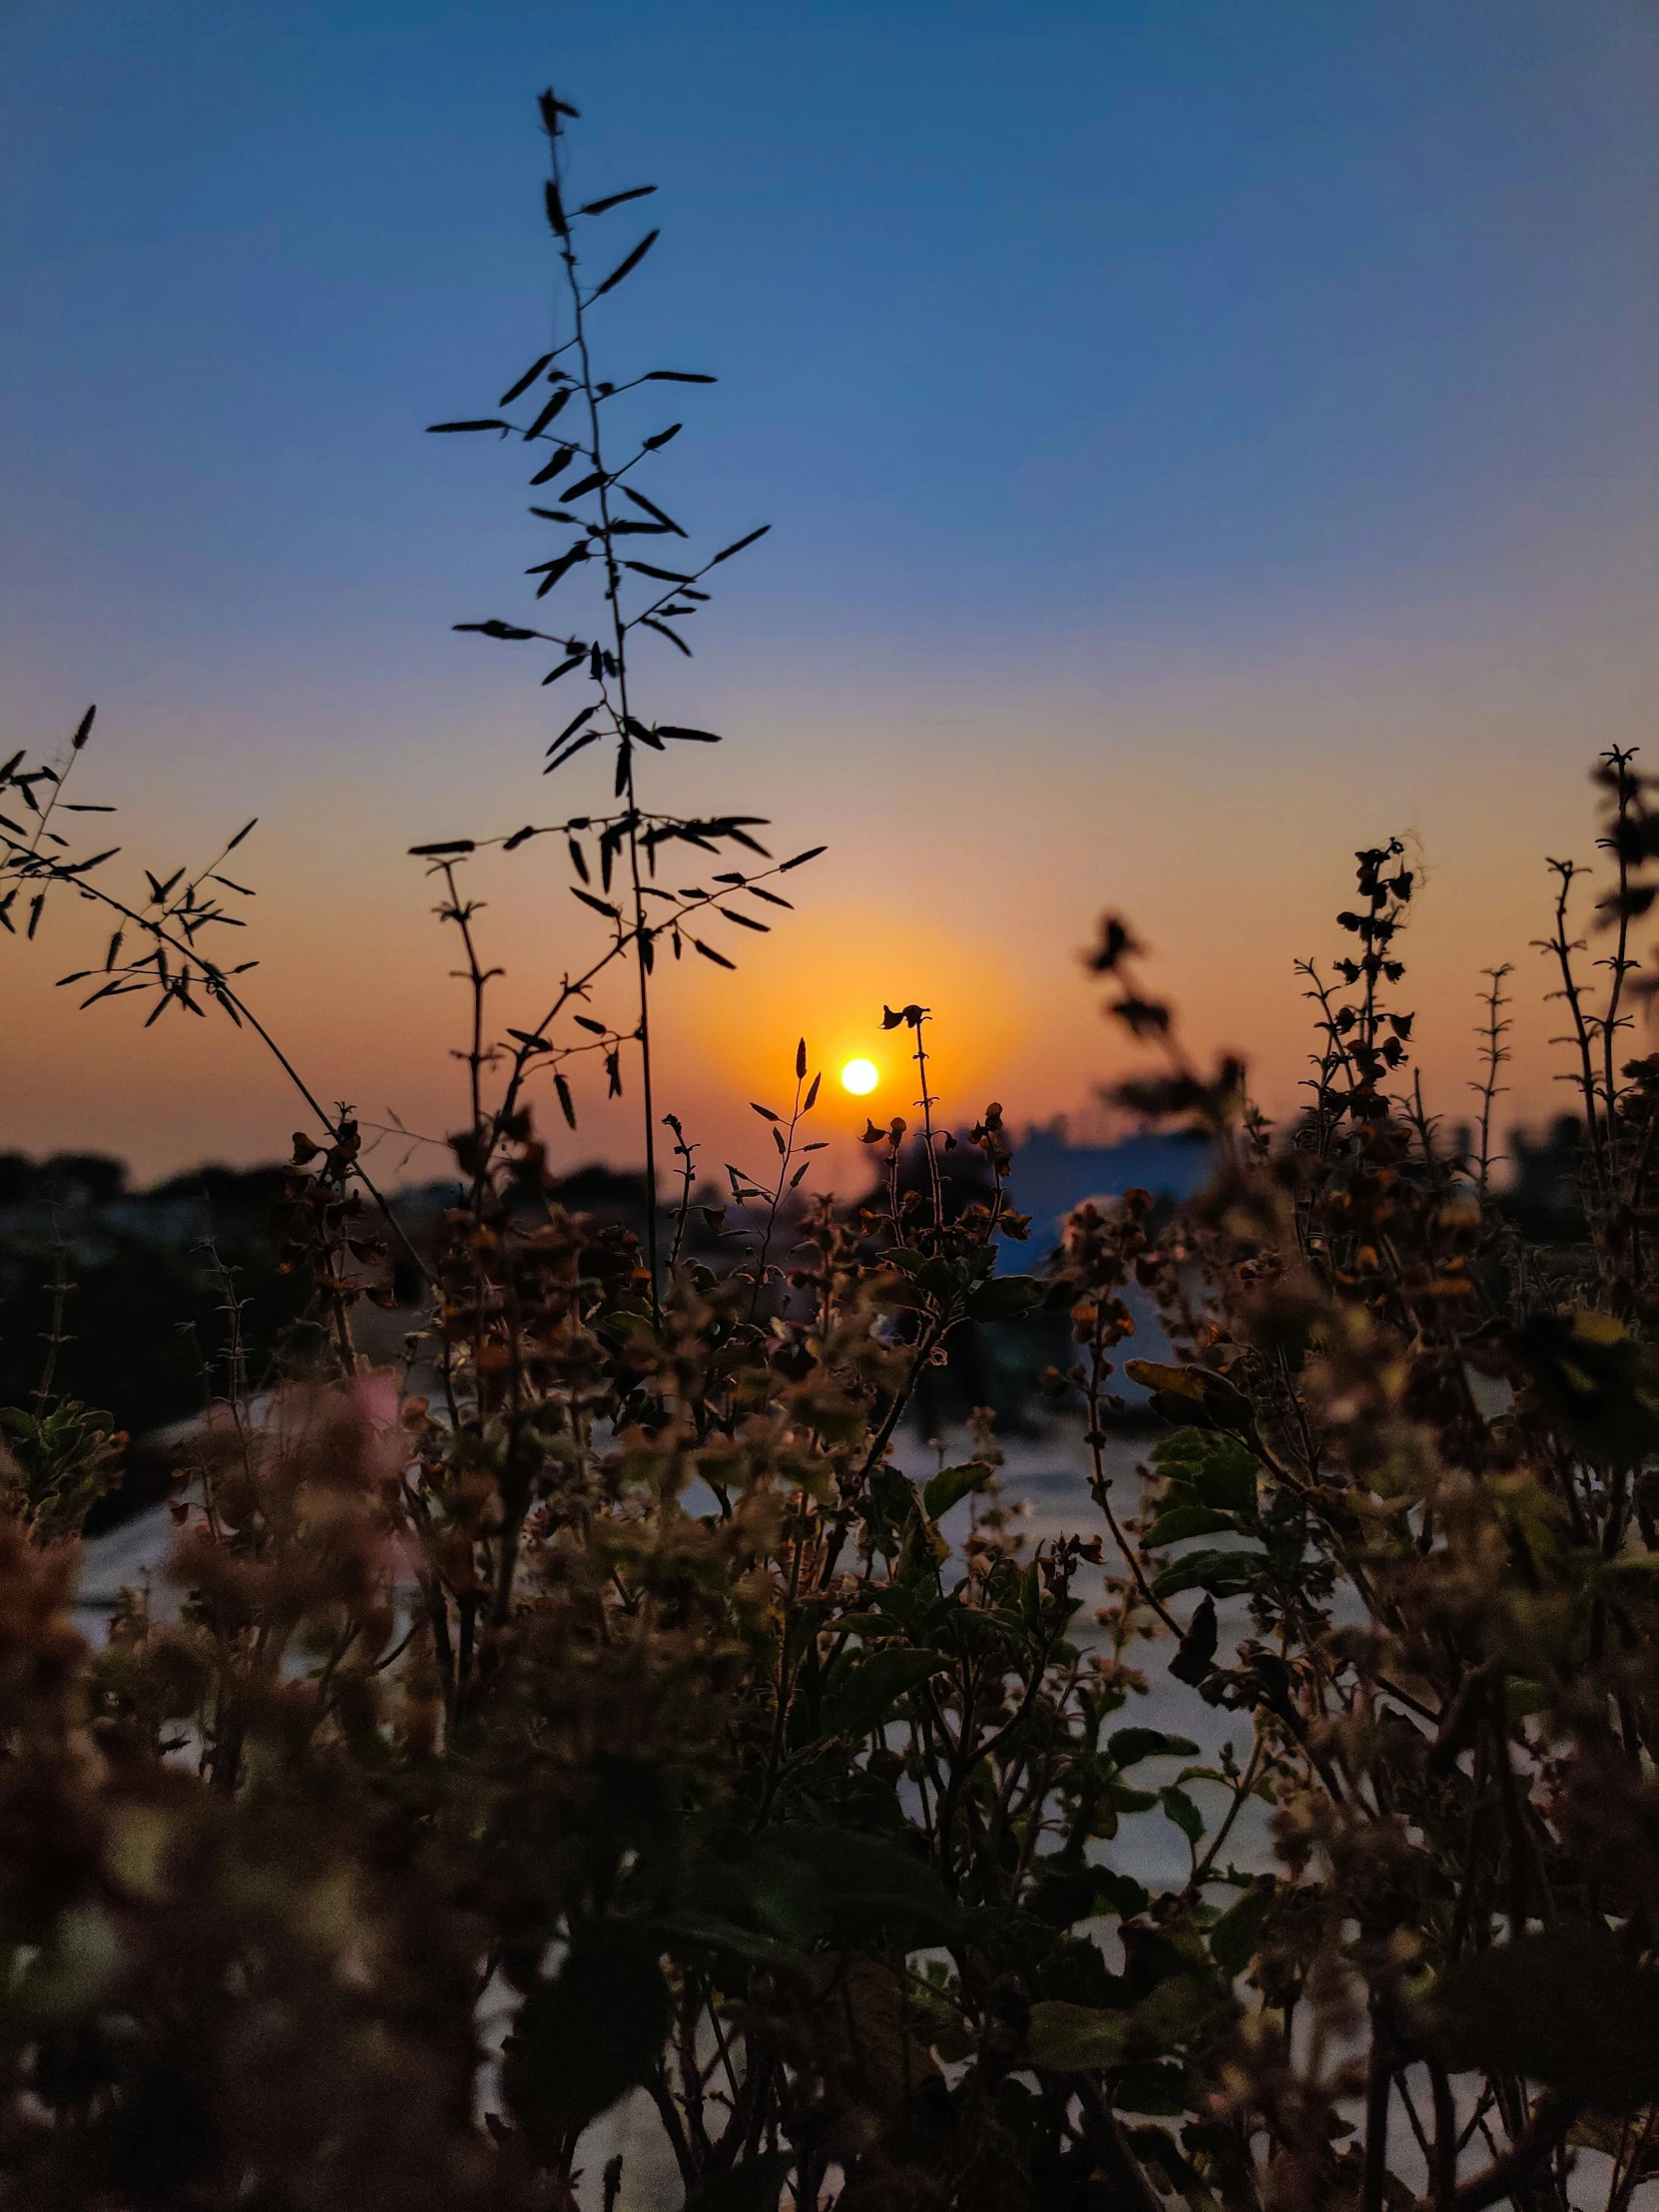 a sunset and some bushes in the foreground